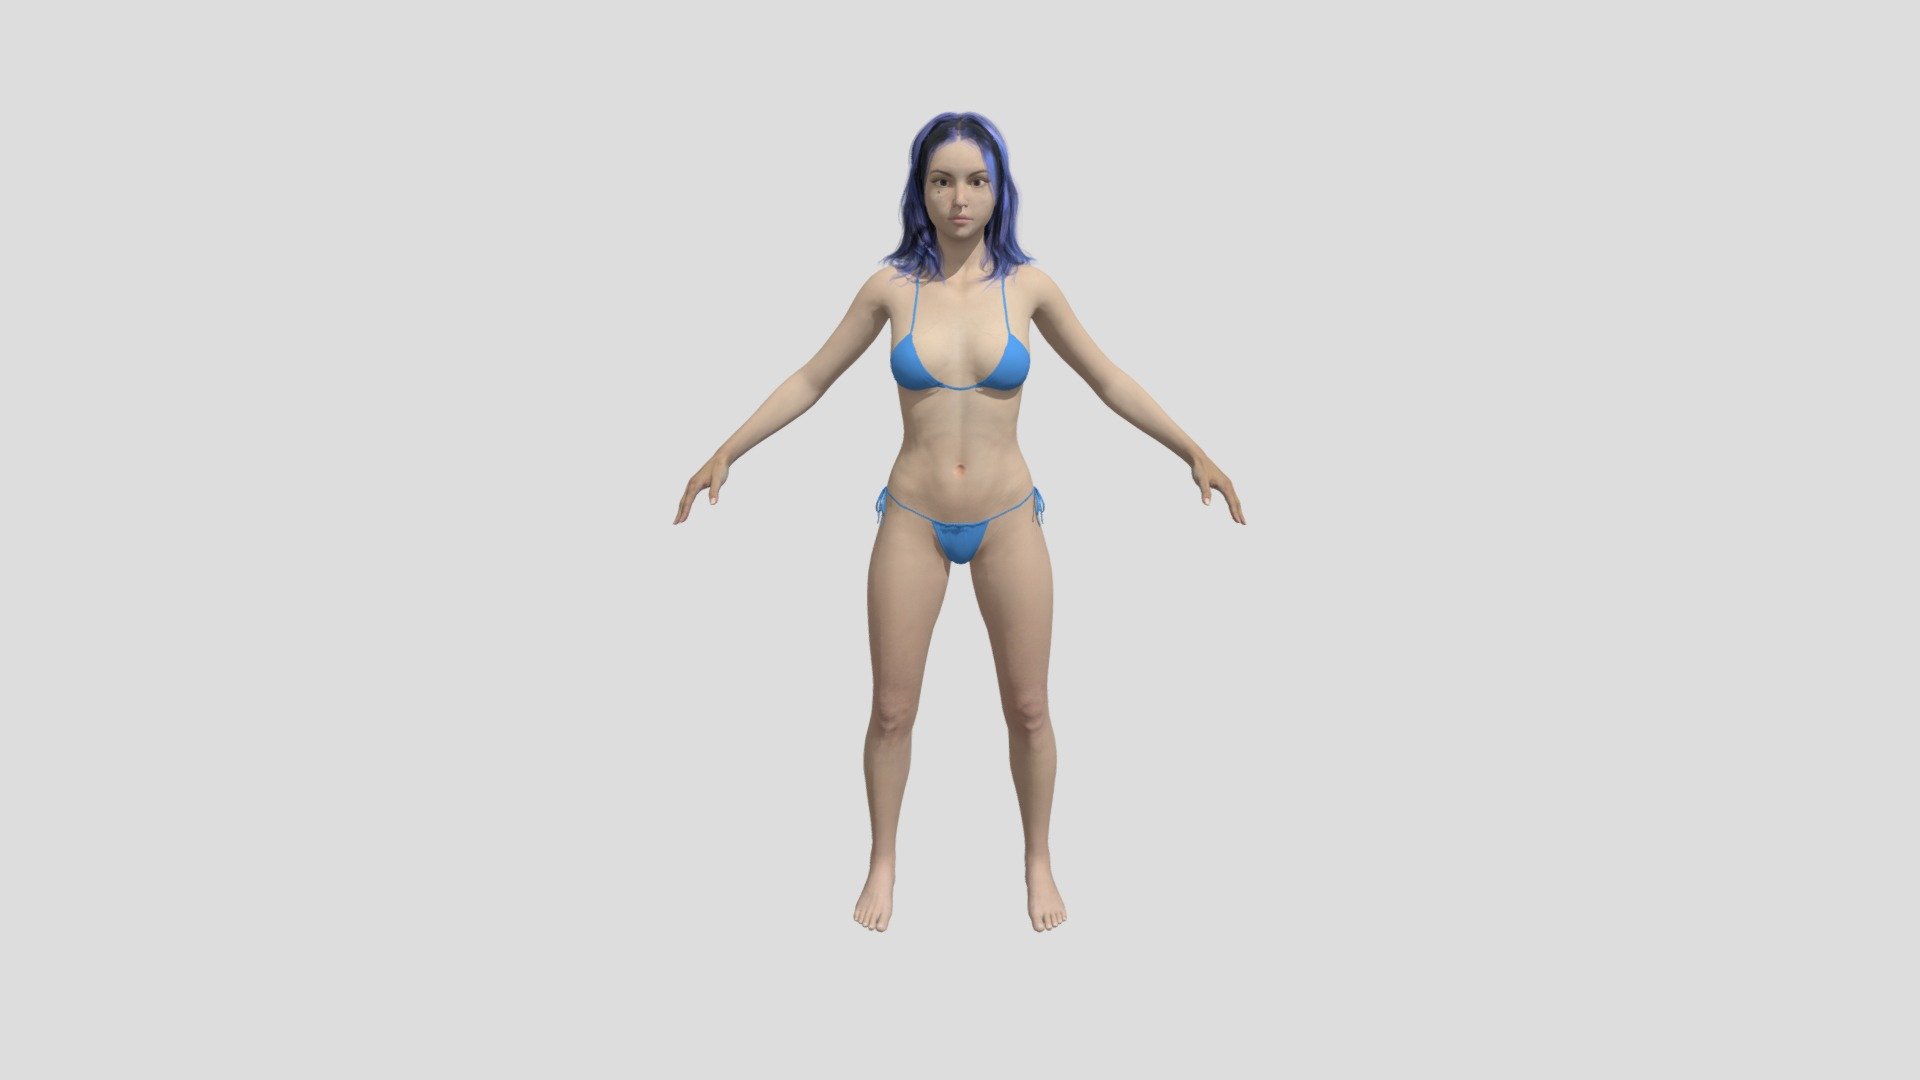 notice : this package contain all texture and map you need for render as ao,metalic,micron,micronmask,position,wsnormal,rougness,sssmap,transmap and more
as external resource to set them up for any render .
if you don't know how to put Cloth on character you can search on YouTube for copyskin for any software *
the model have more than 6 material, eyes nail arm body ..
-advance skeleton rig. good for animator to practice .
-the model work with live link
Features:
-material : you can change setting like Base Color, Ao, Blend, Diplacement, Glow, metalic, UV, Normal, opacity ,ORM , Roughness , Specular
- High quality model, correctly scaled for an accurate representation of the original object.
- Models resolutions are optimized for polygon efficiency.
- Model is fully textured with all materials applied
-all image with white BG are rendered with unreal engine
- No special plugin needed to open scene
-clean skin ,uv, and ready to anim - Realistic Female Game Ready - 3D model by Hamza Khaloui (@khalouihamzaa) 3d model